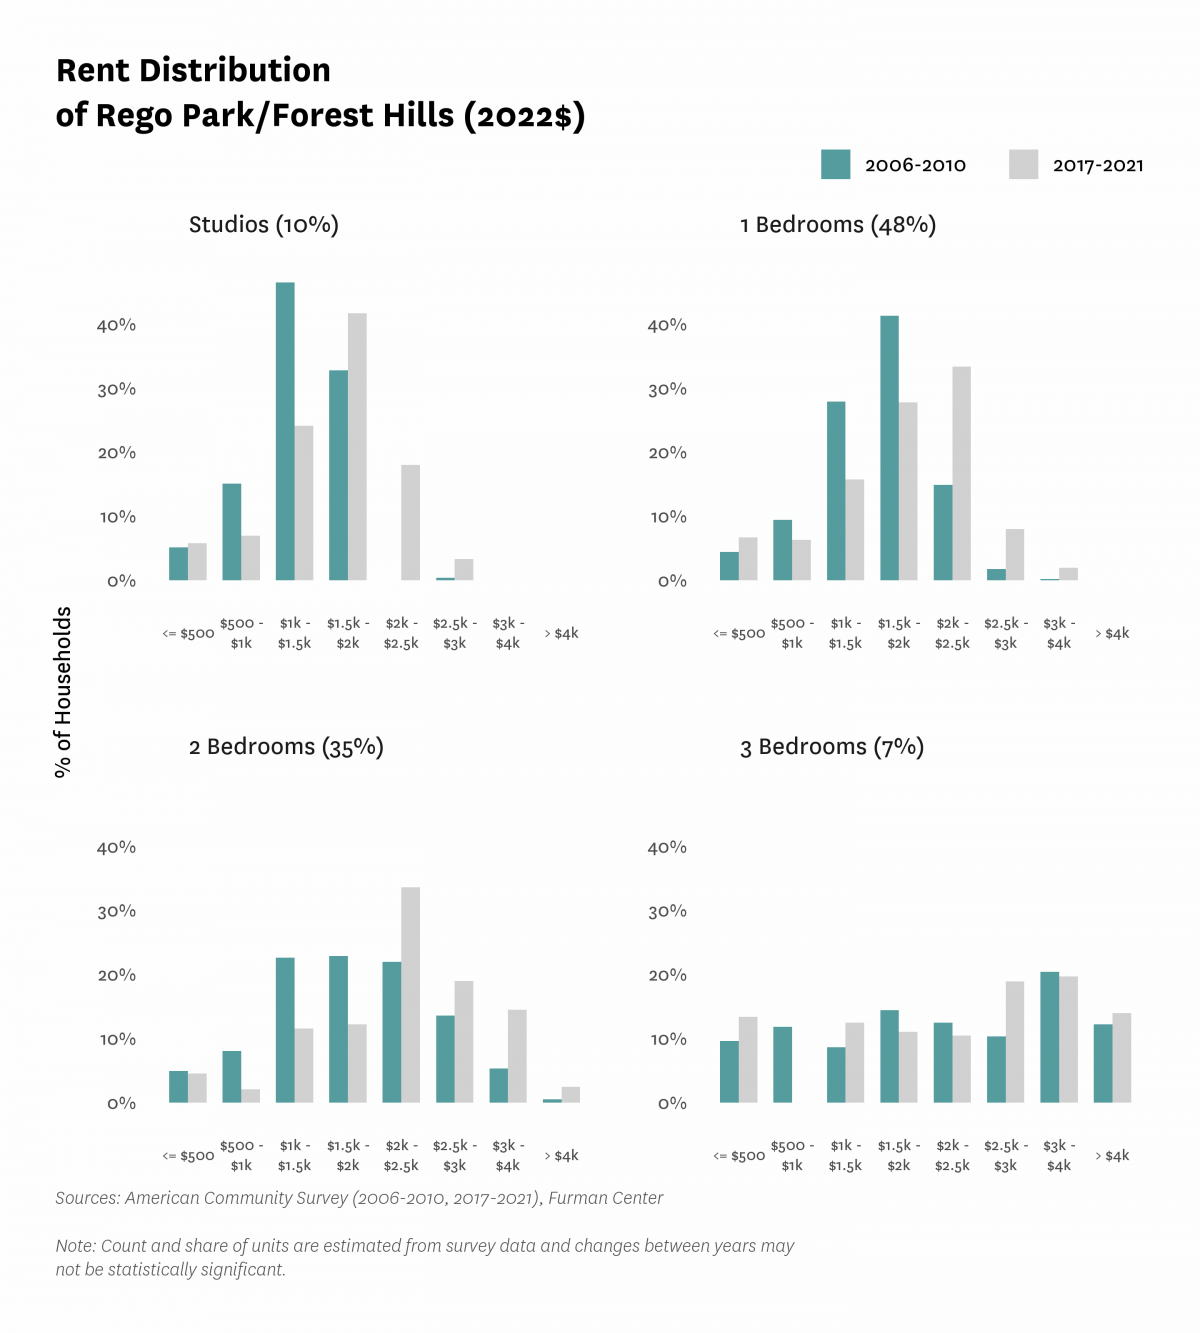 Graph showing the distribution of rents in Rego Park/Forest Hills in both 2010 and 2017-2021.